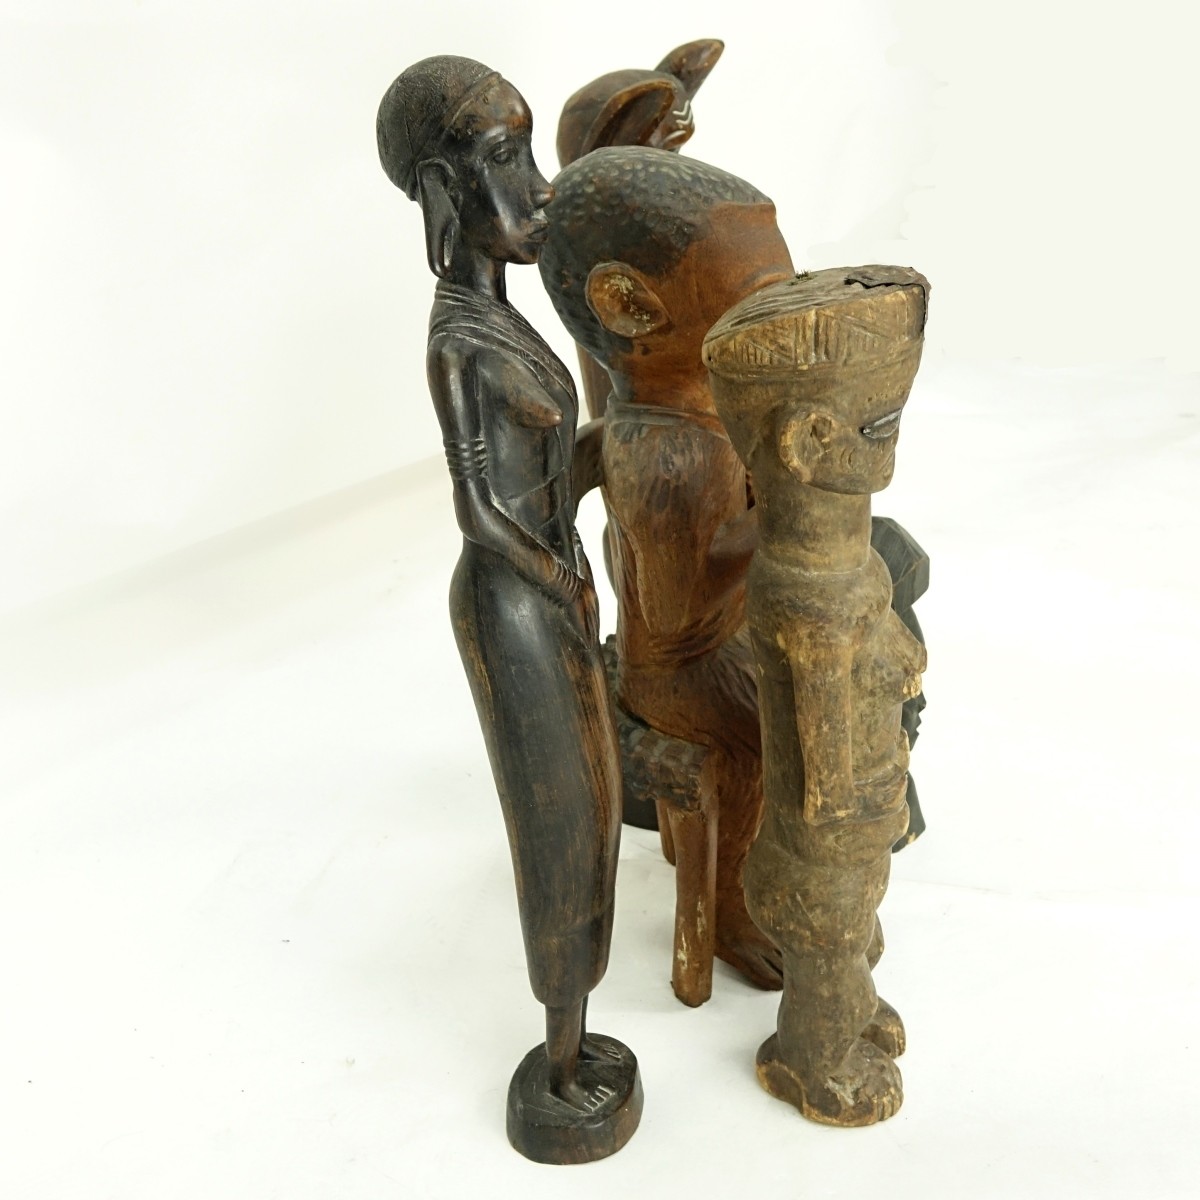 Collection Of Five (5) Carved Wood African Figures